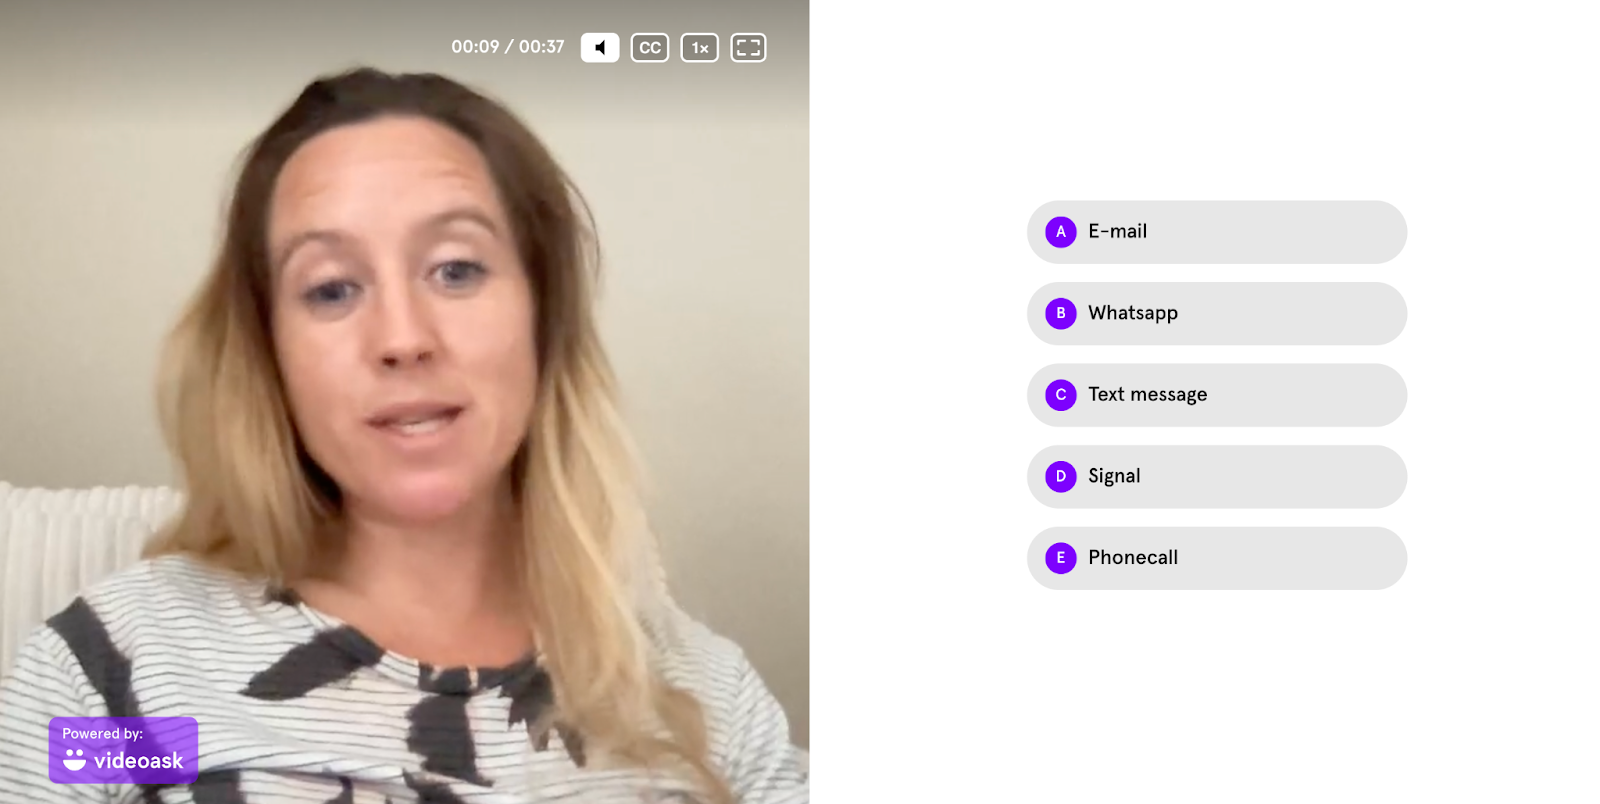 Example of VideoAsk in use. To the left, is a screenshot from a video of a white woman asking a question. To the right is five options to answer the question. 